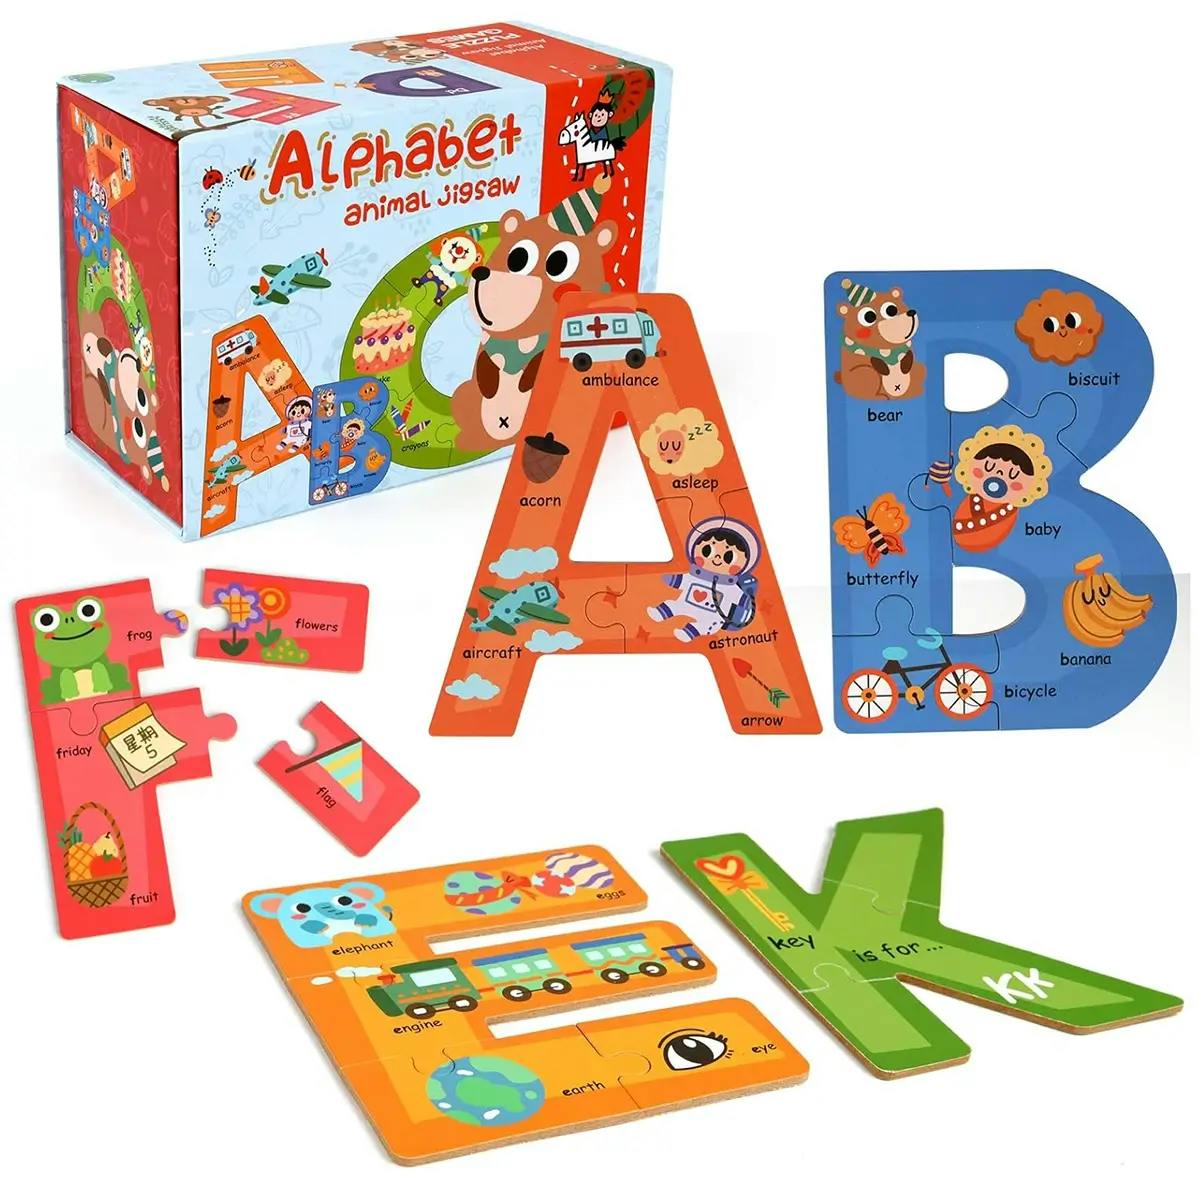 Educational wooden jigsaw puzzle for toddlers.